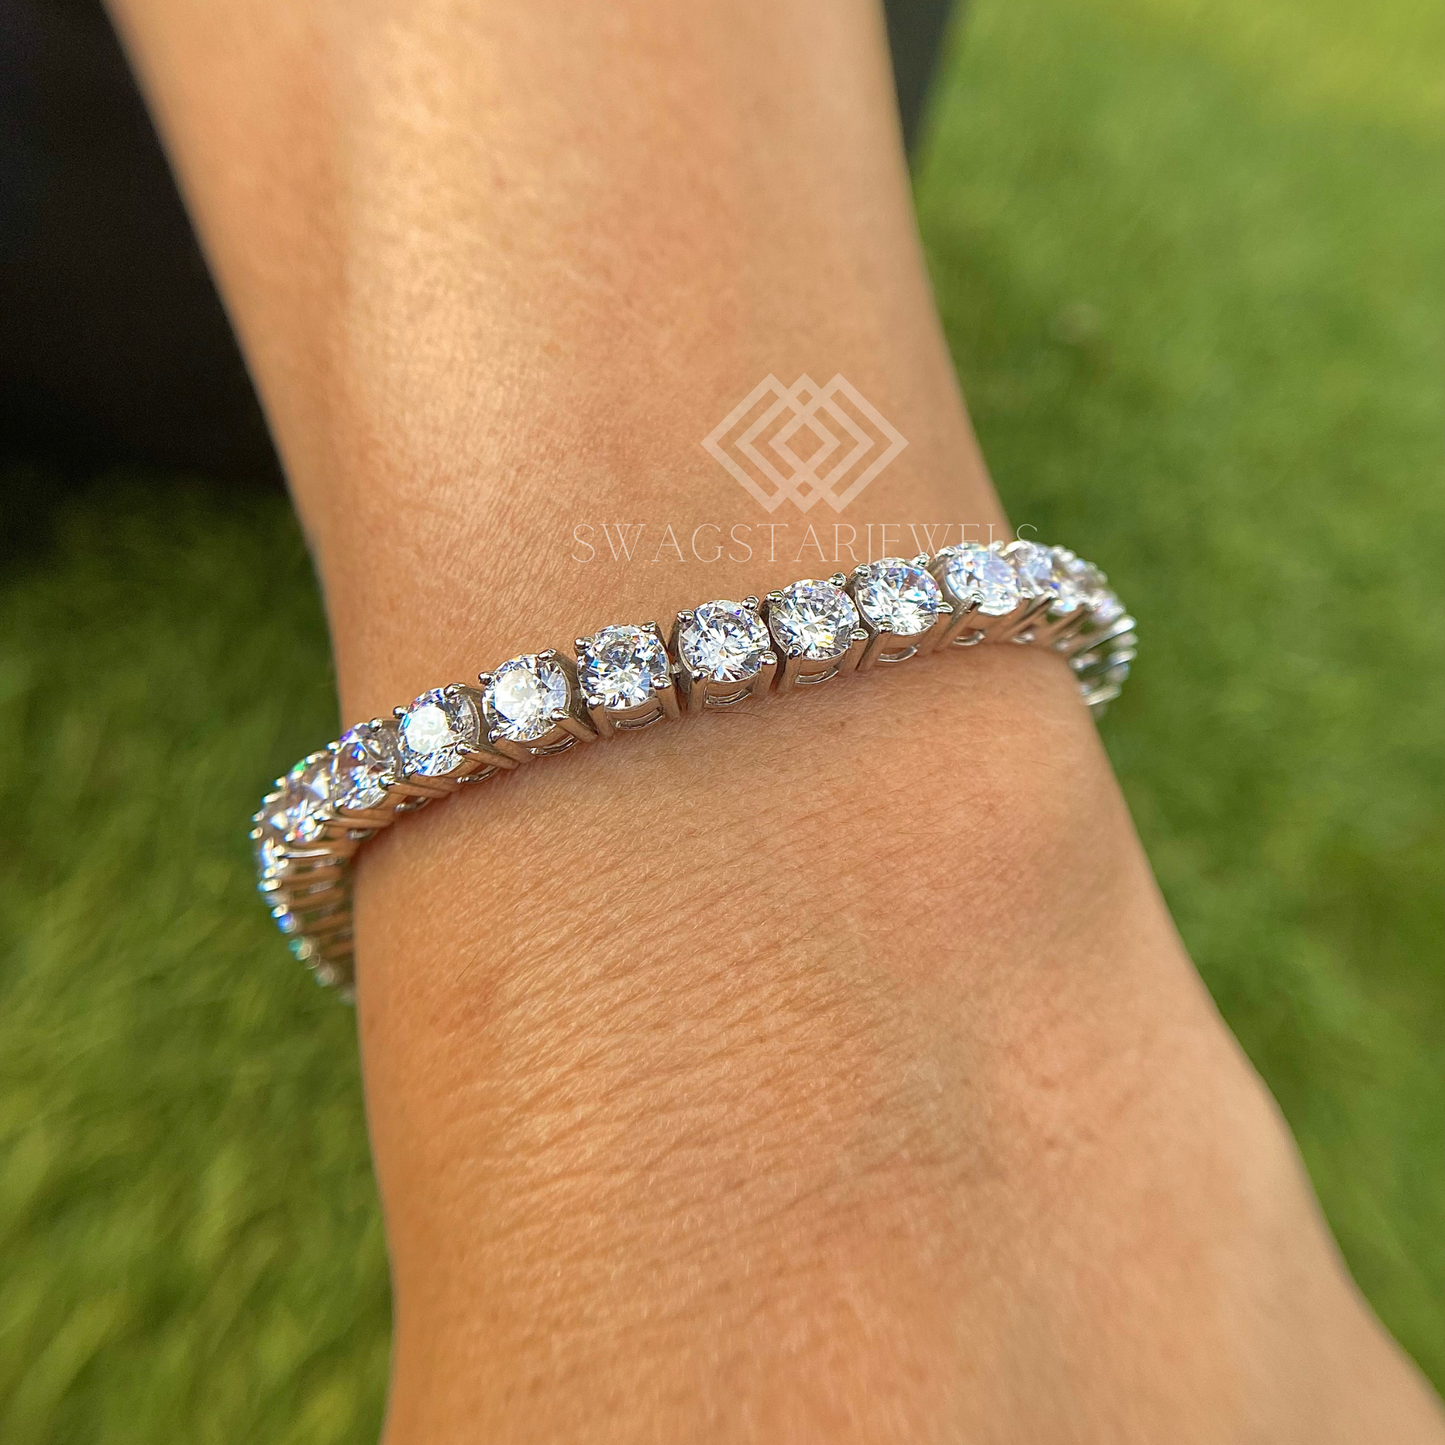 Round Shape Bracelet With Lab-Grown & Natural Diamonds, Jewelry By Leading Manufacturer From Swagstar, Surat. Explore Wedding, Engagement, Eternity Rings,  Earring & Studs, Bracelets In 10k, 14k, & 18k Gold Varieties, Including White, Yellow, Rose Gold.